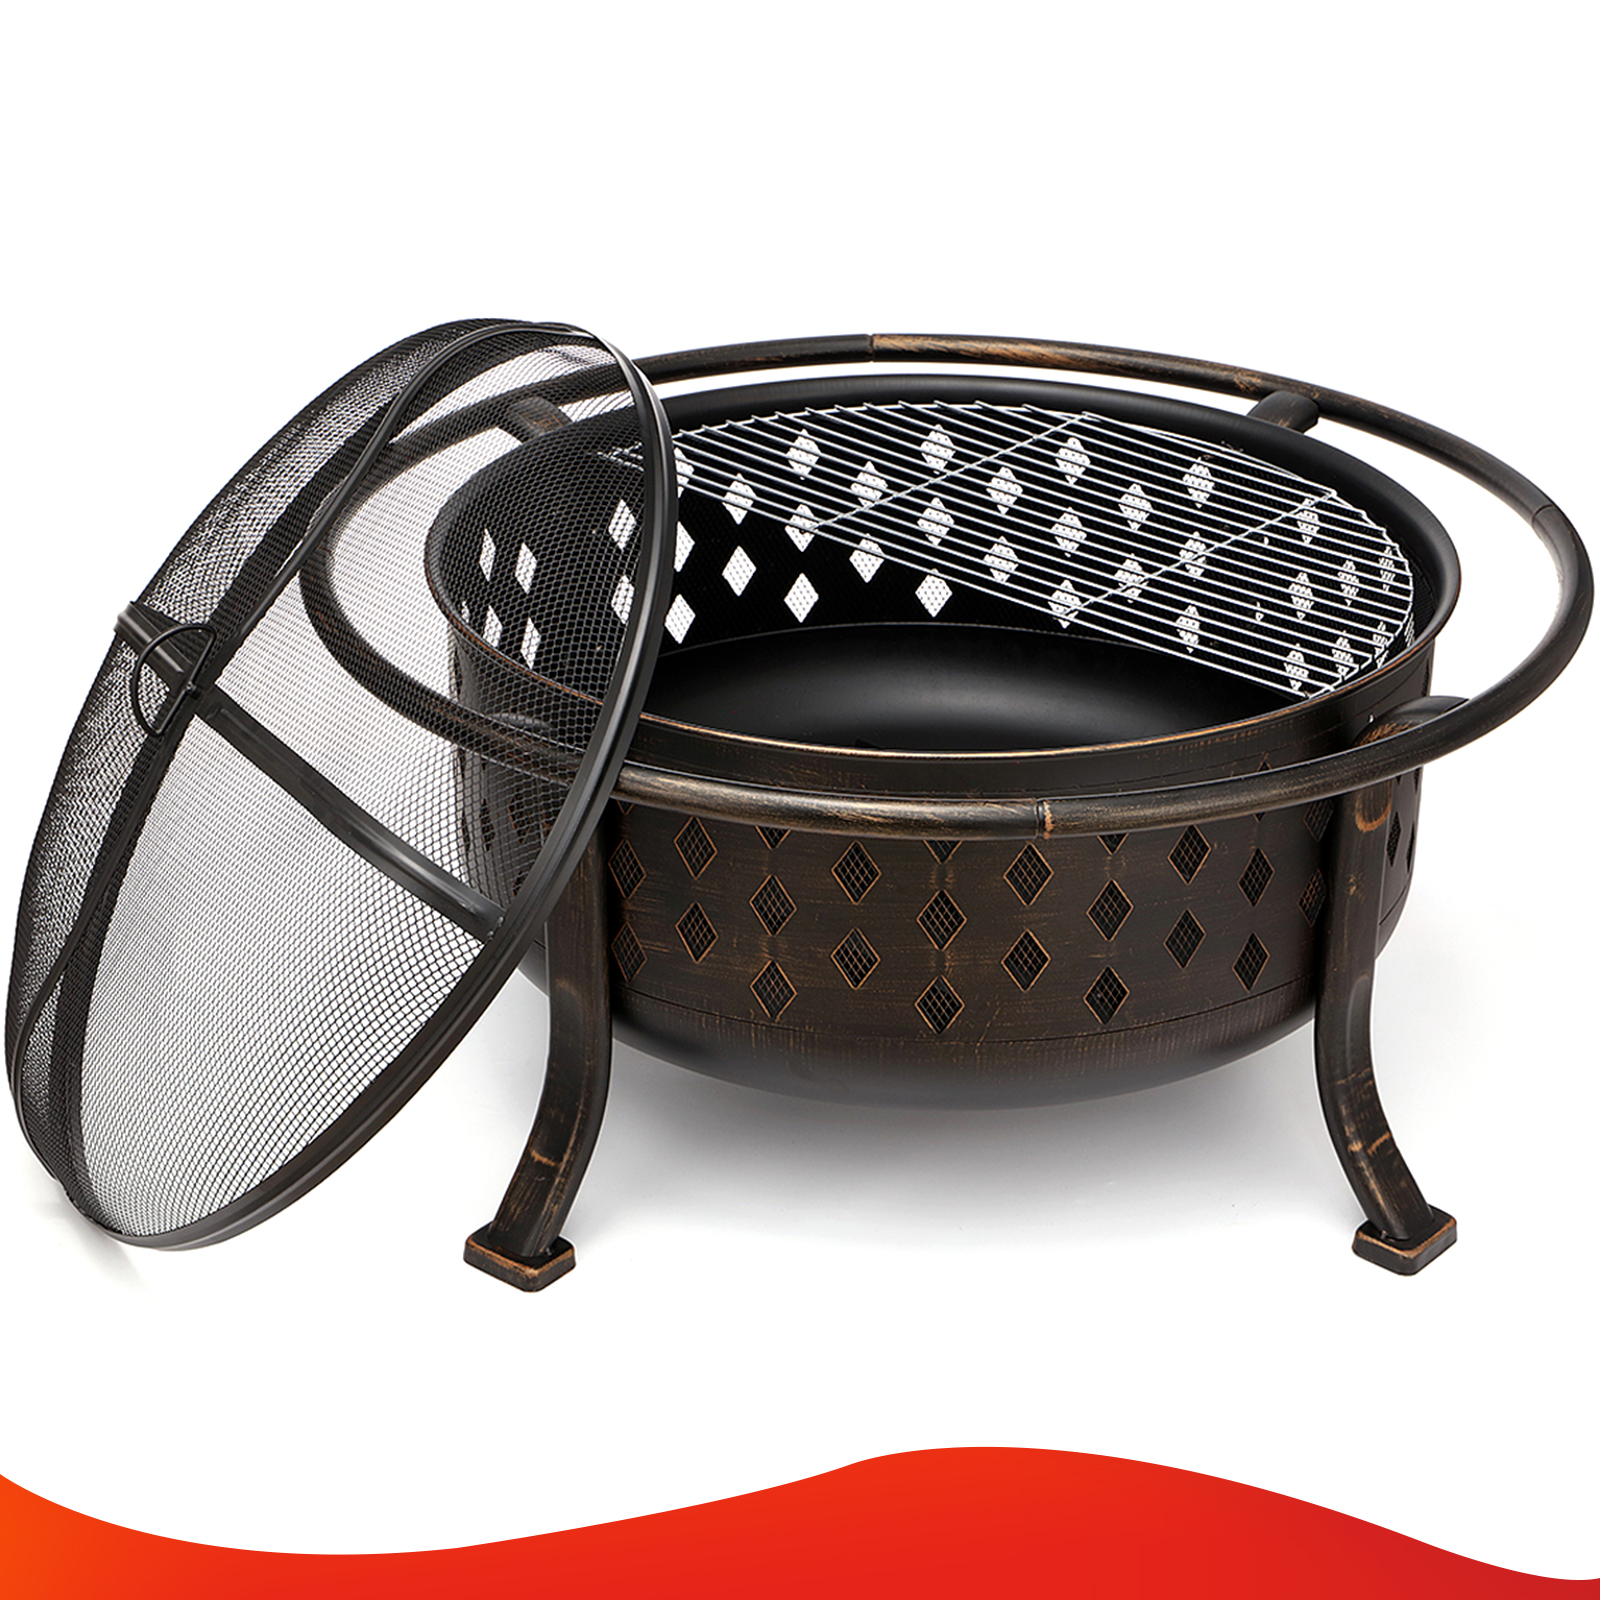 Singlyfire 36 inch Fire Pit for Outside Wood Burning Fire Pit Large Deep Fire Bowl for Camping Picnic Bonfire Patio Outside Backyard Garden Bonfire Pit with Cooking Grill Grate Spark Screen Log Grate - image 3 of 9